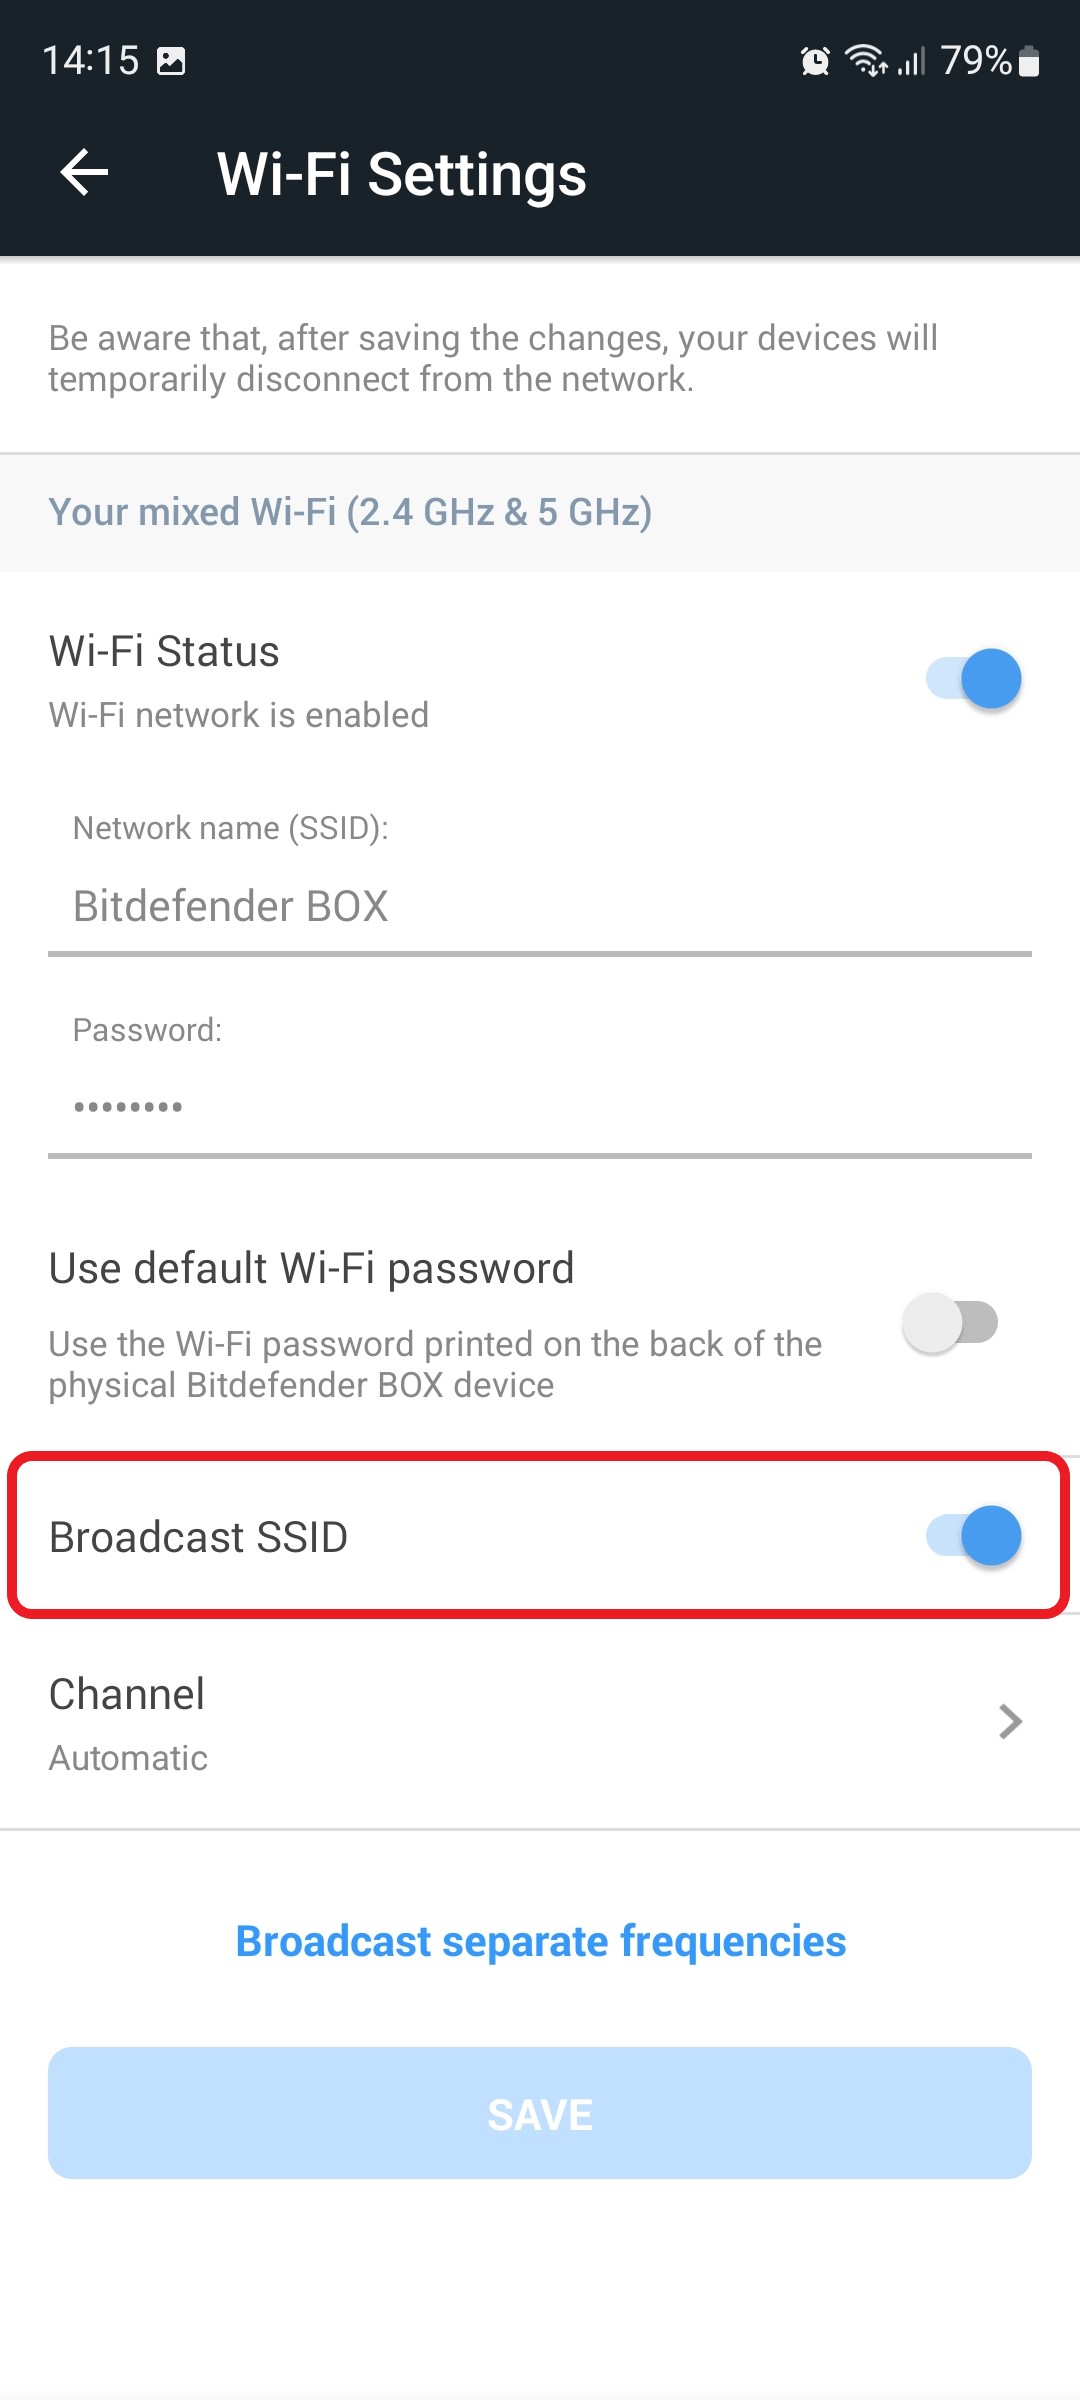 Enable Broadcast SSID to hide your Wi-Fi